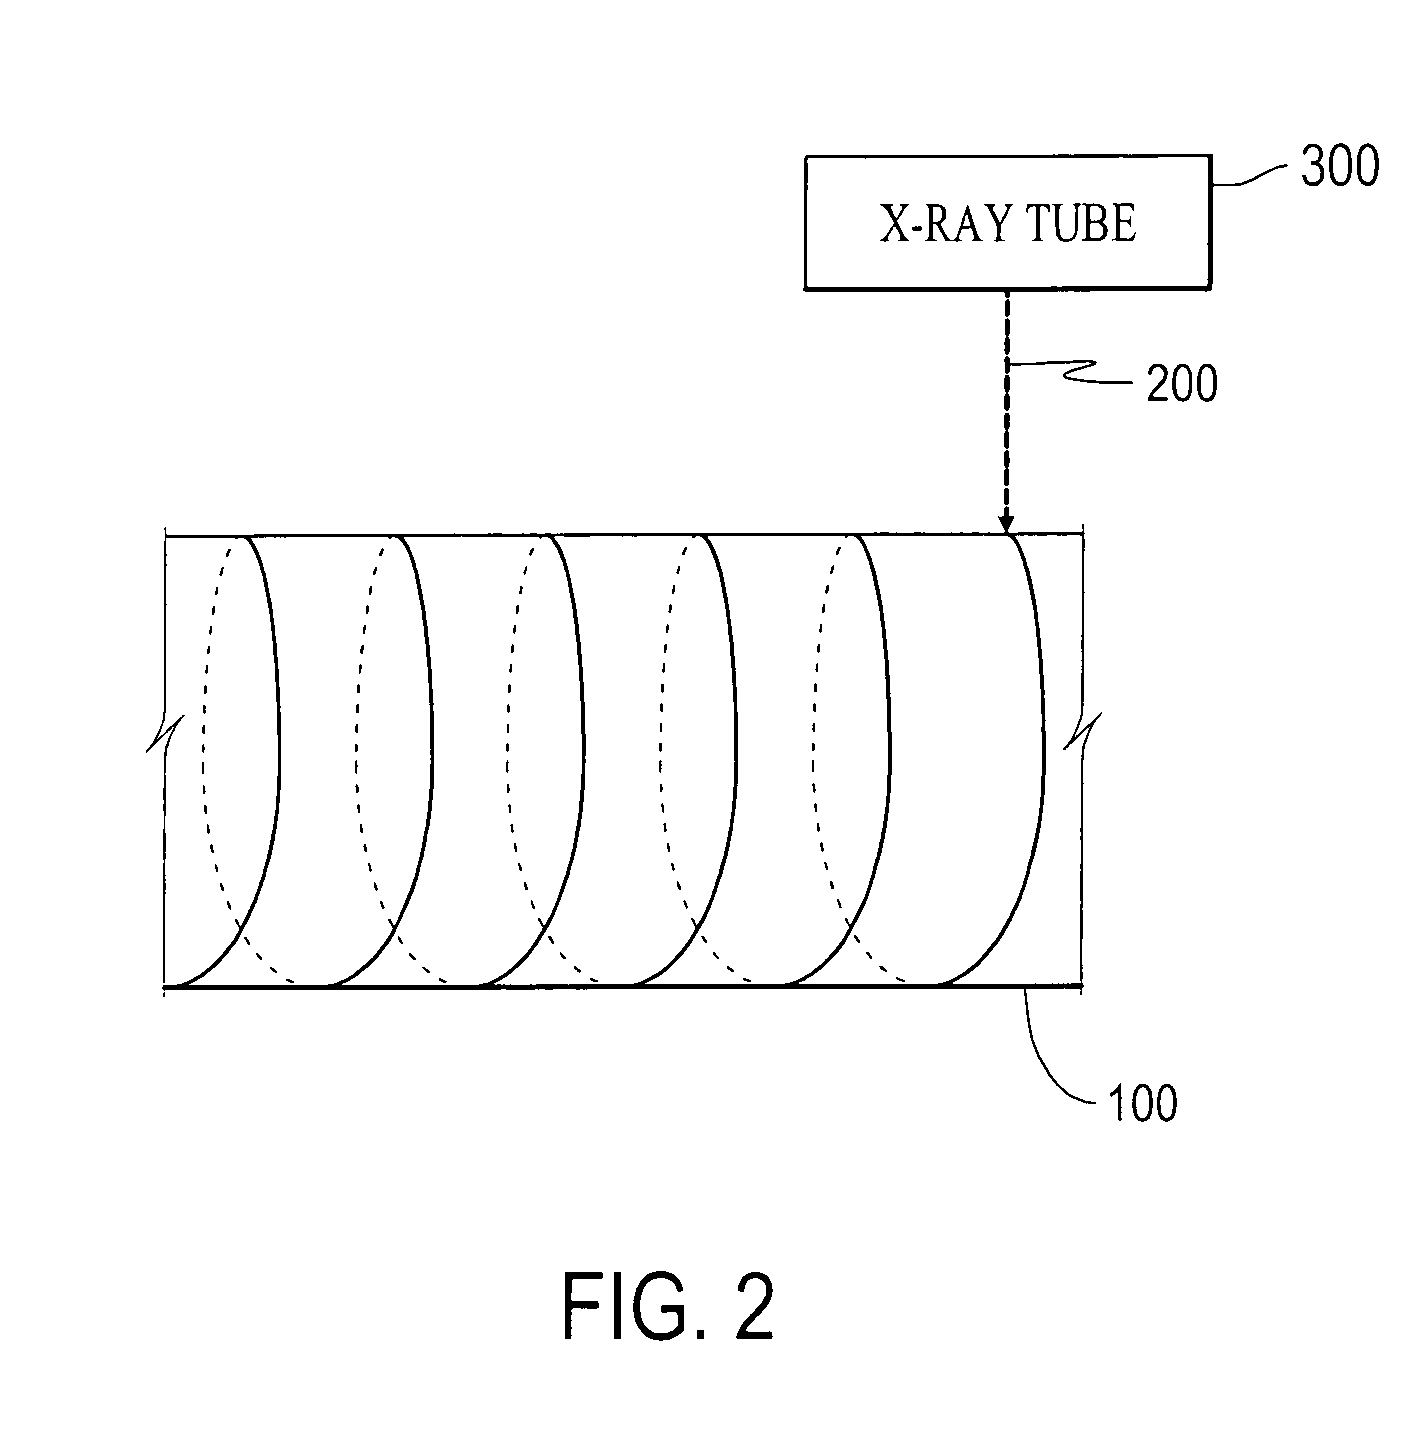 Method for inspecting ceramic structures